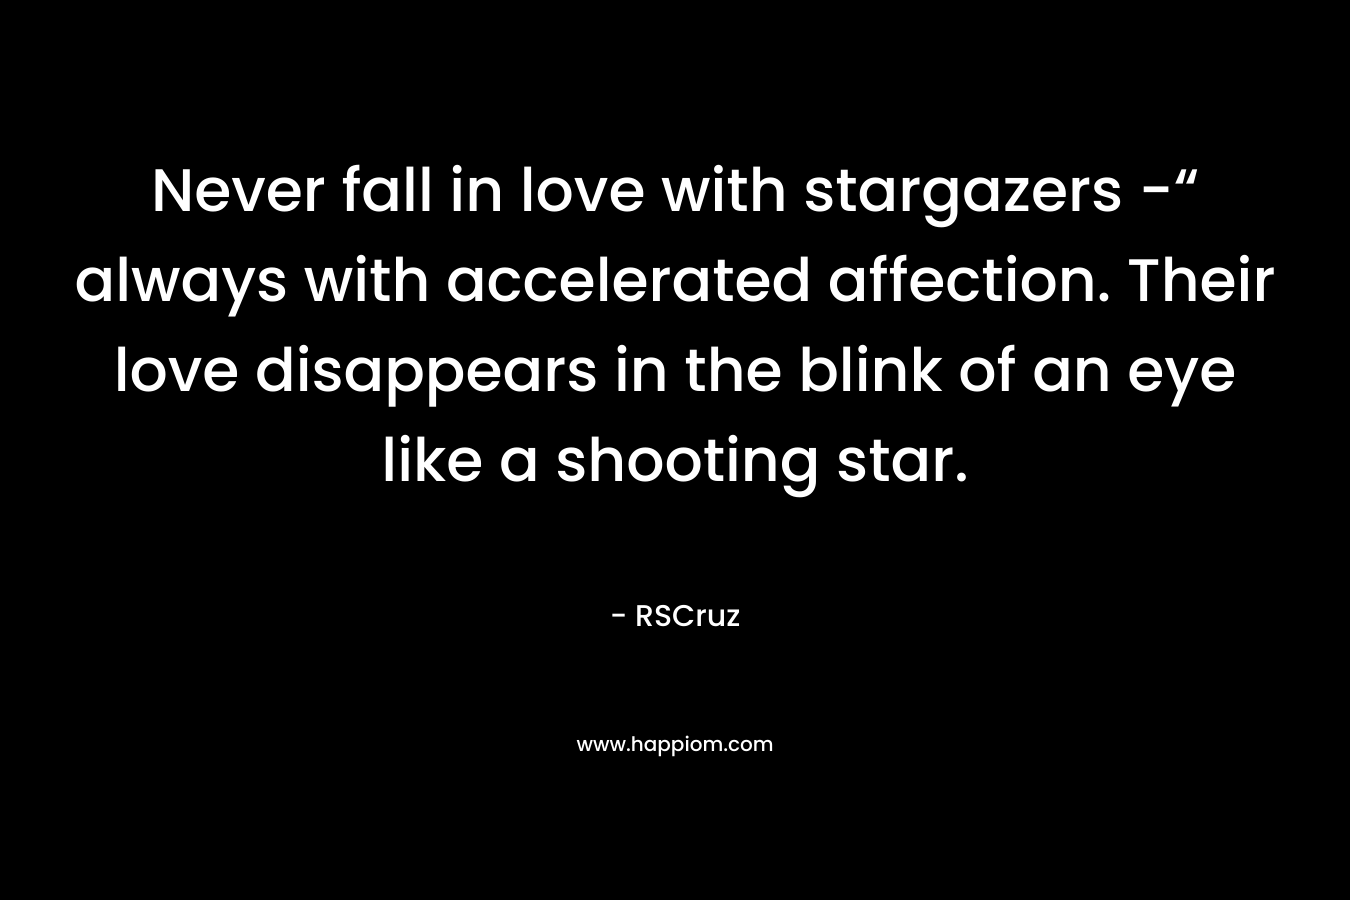 Never fall in love with stargazers -“ always with accelerated affection. Their love disappears in the blink of an eye like a shooting star.